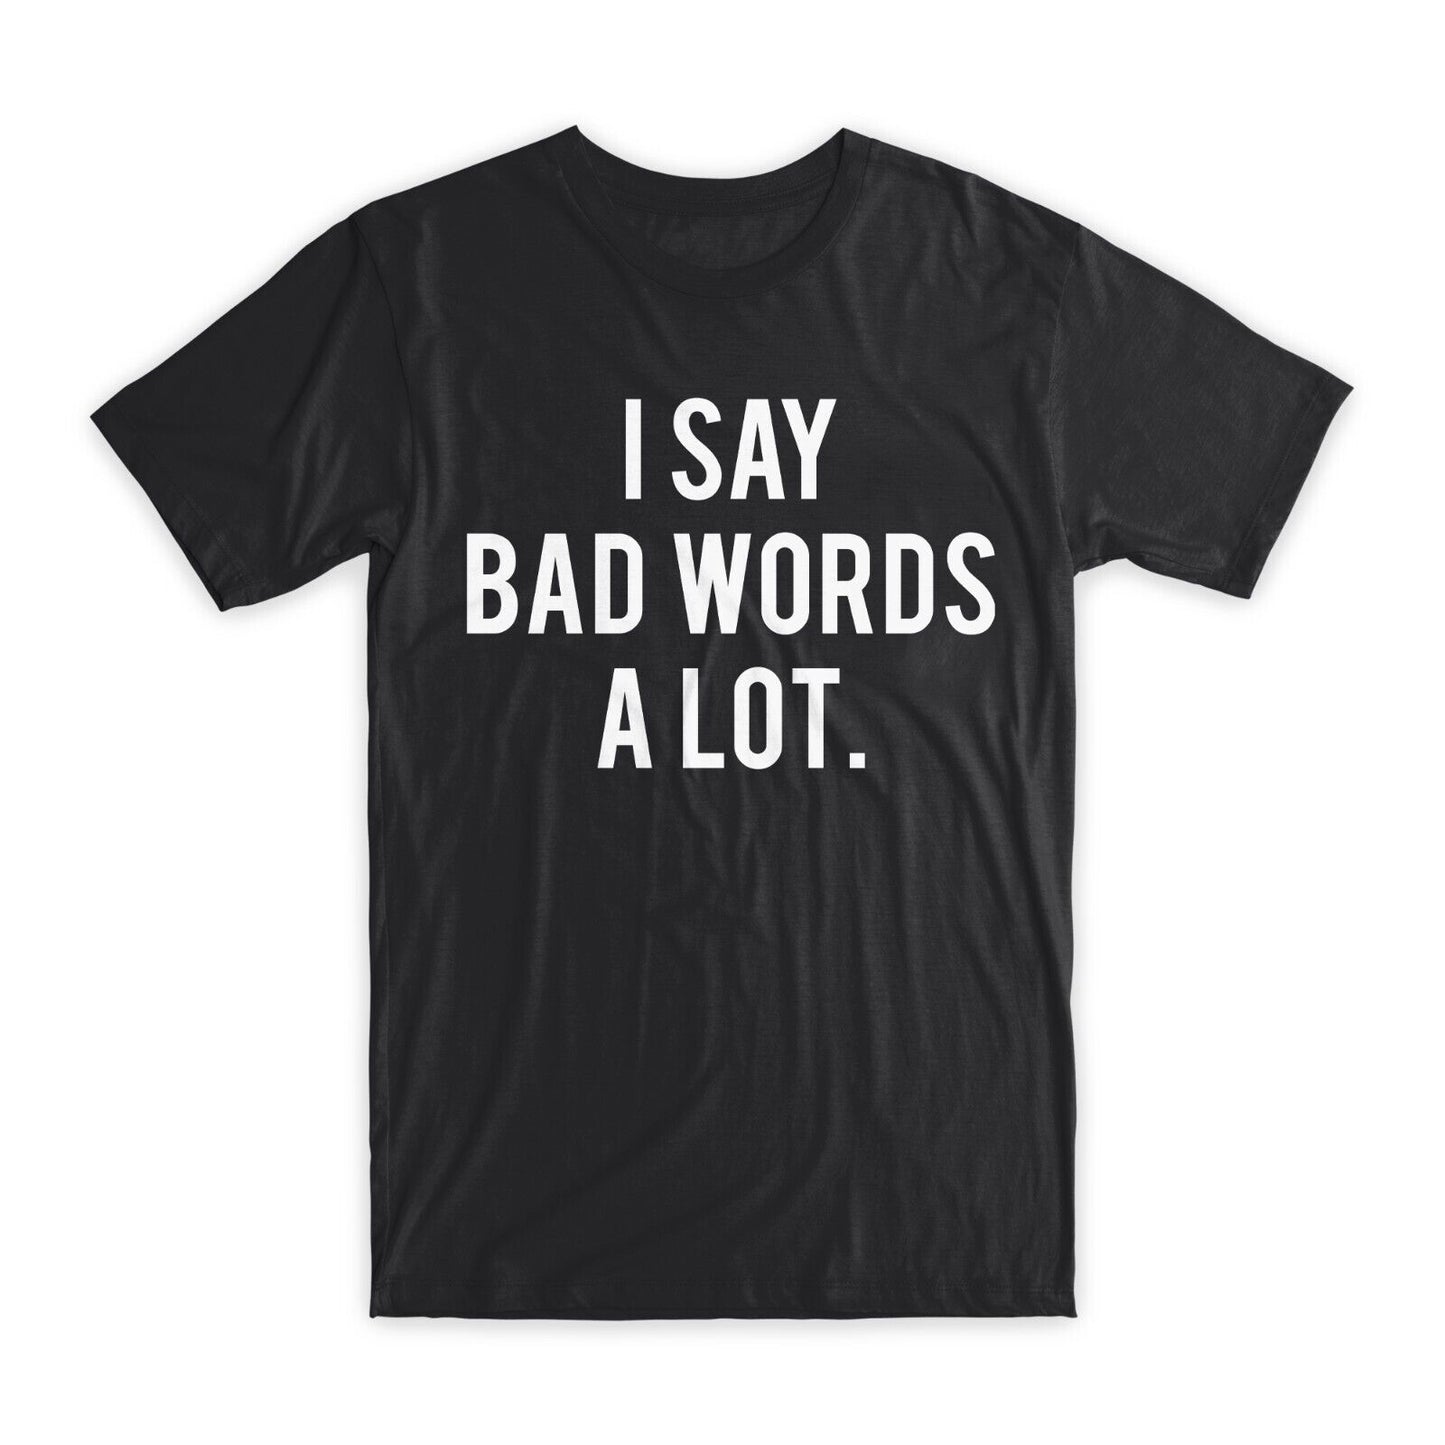 I Say Bad Words A Lot T-Shirt Premium Soft Cotton Crew Neck Funny Tees Gifts NEW